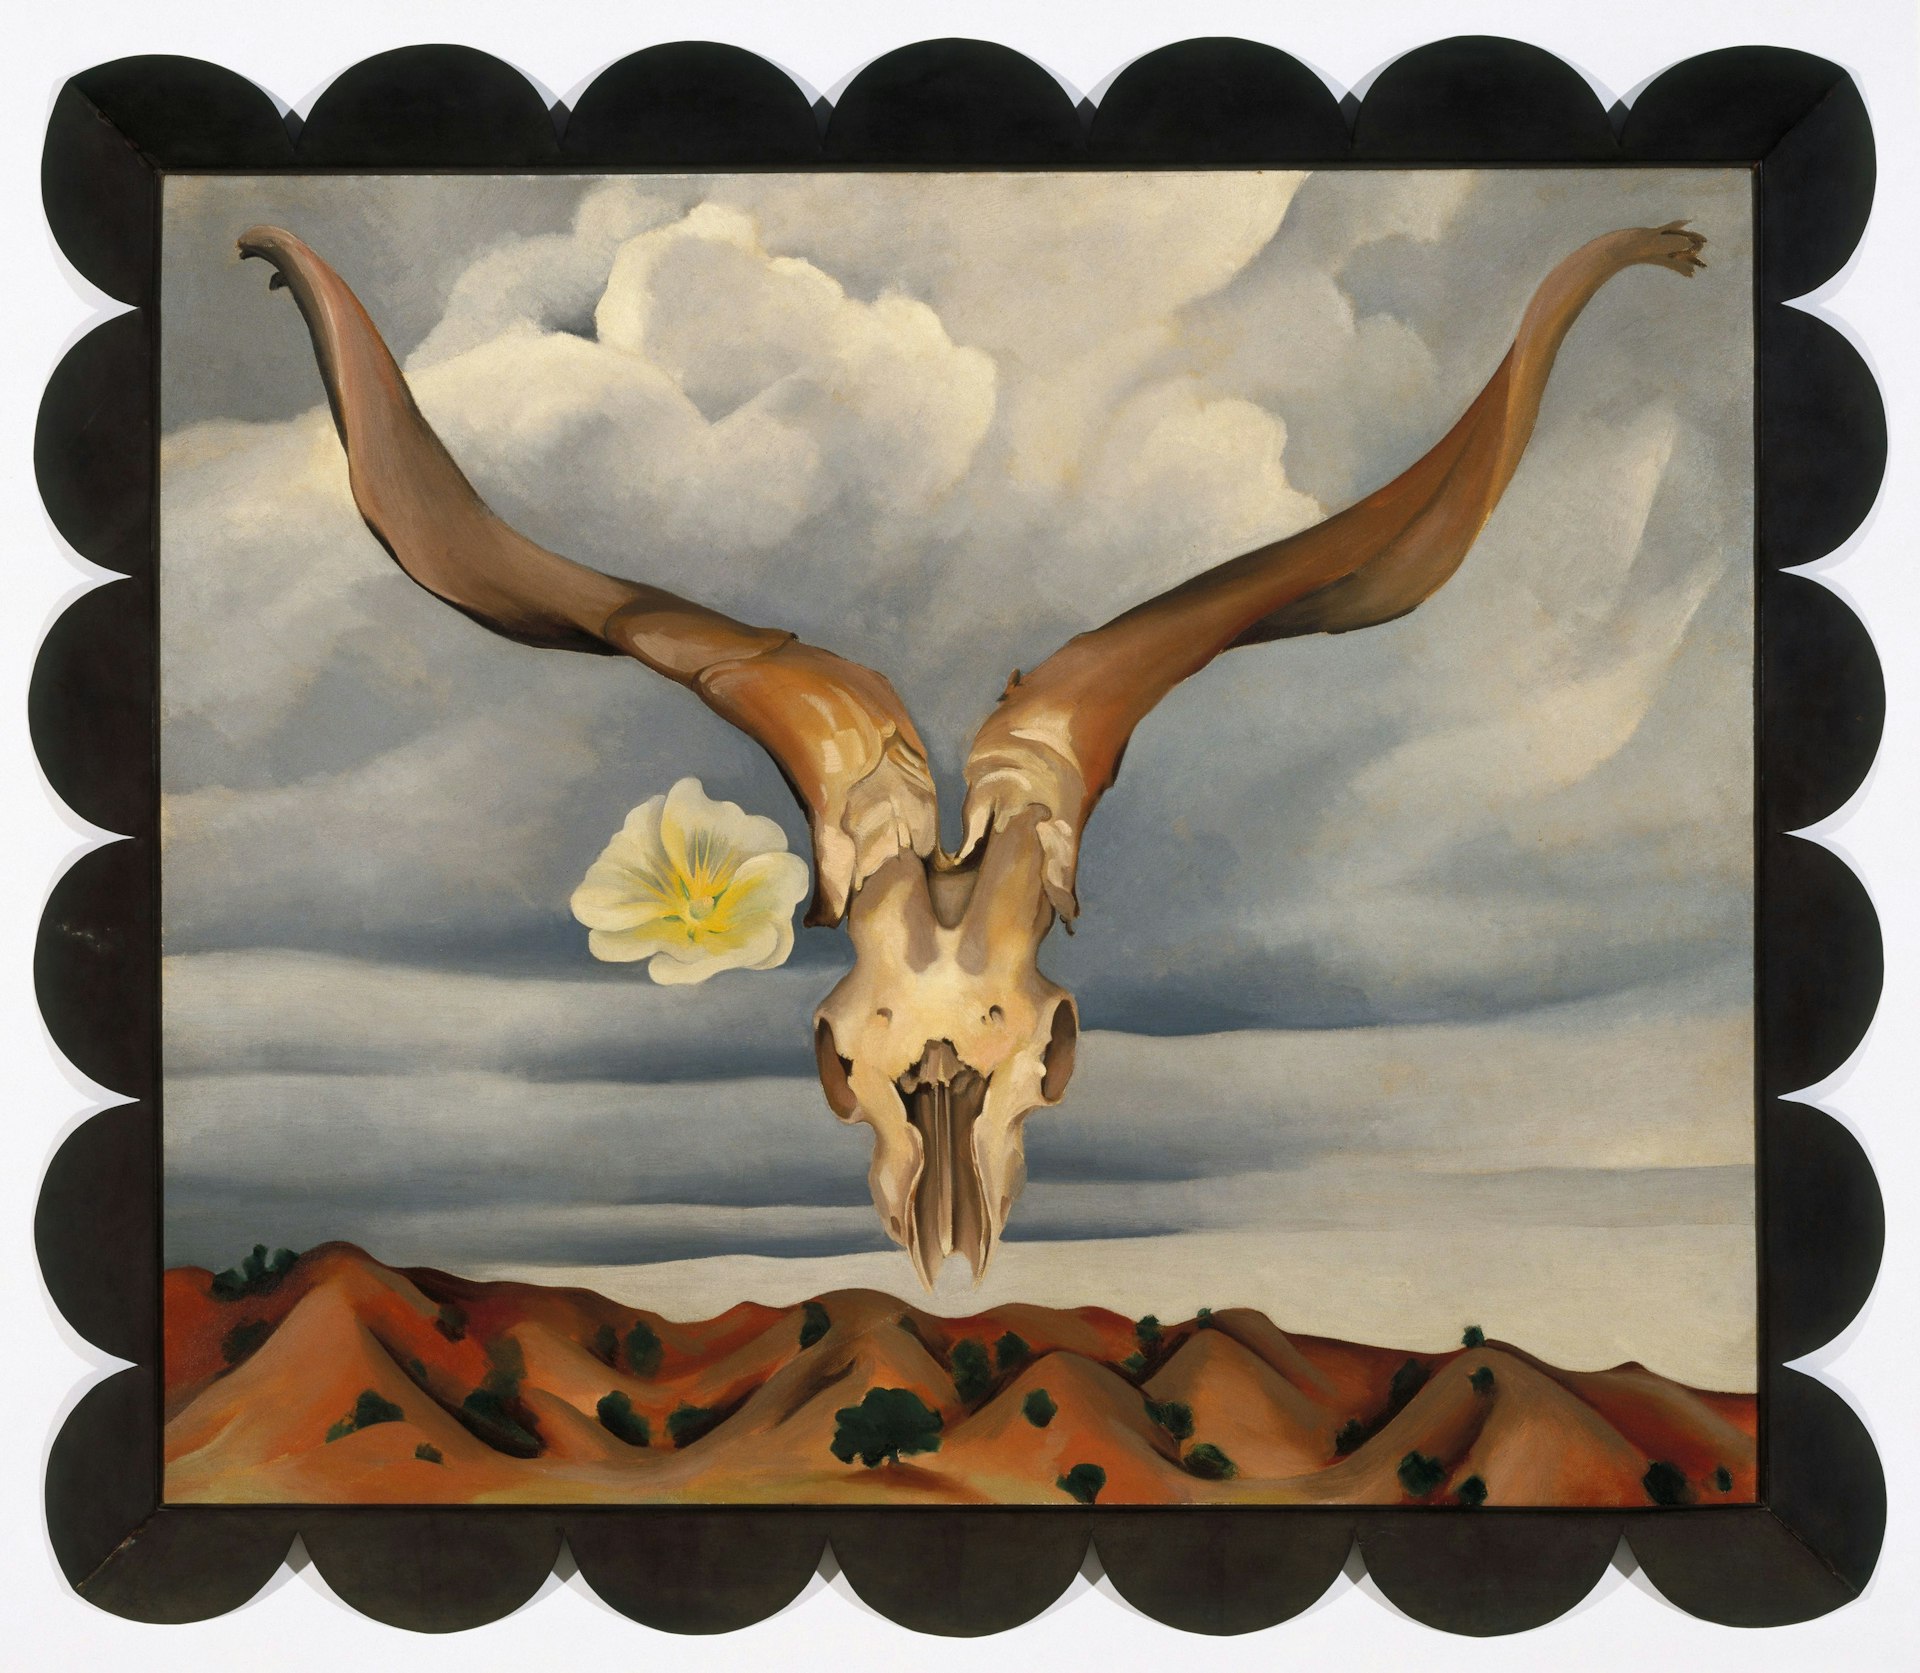 Ram’s Head, White Hollyhock–Hills (Ram’s Head and White Hollyhock, New Mexico), 1935. Brooklyn Museum; Bequest of Edith and Milton Lowenthal, 1992.11.28. (Photo: Brooklyn Museum)